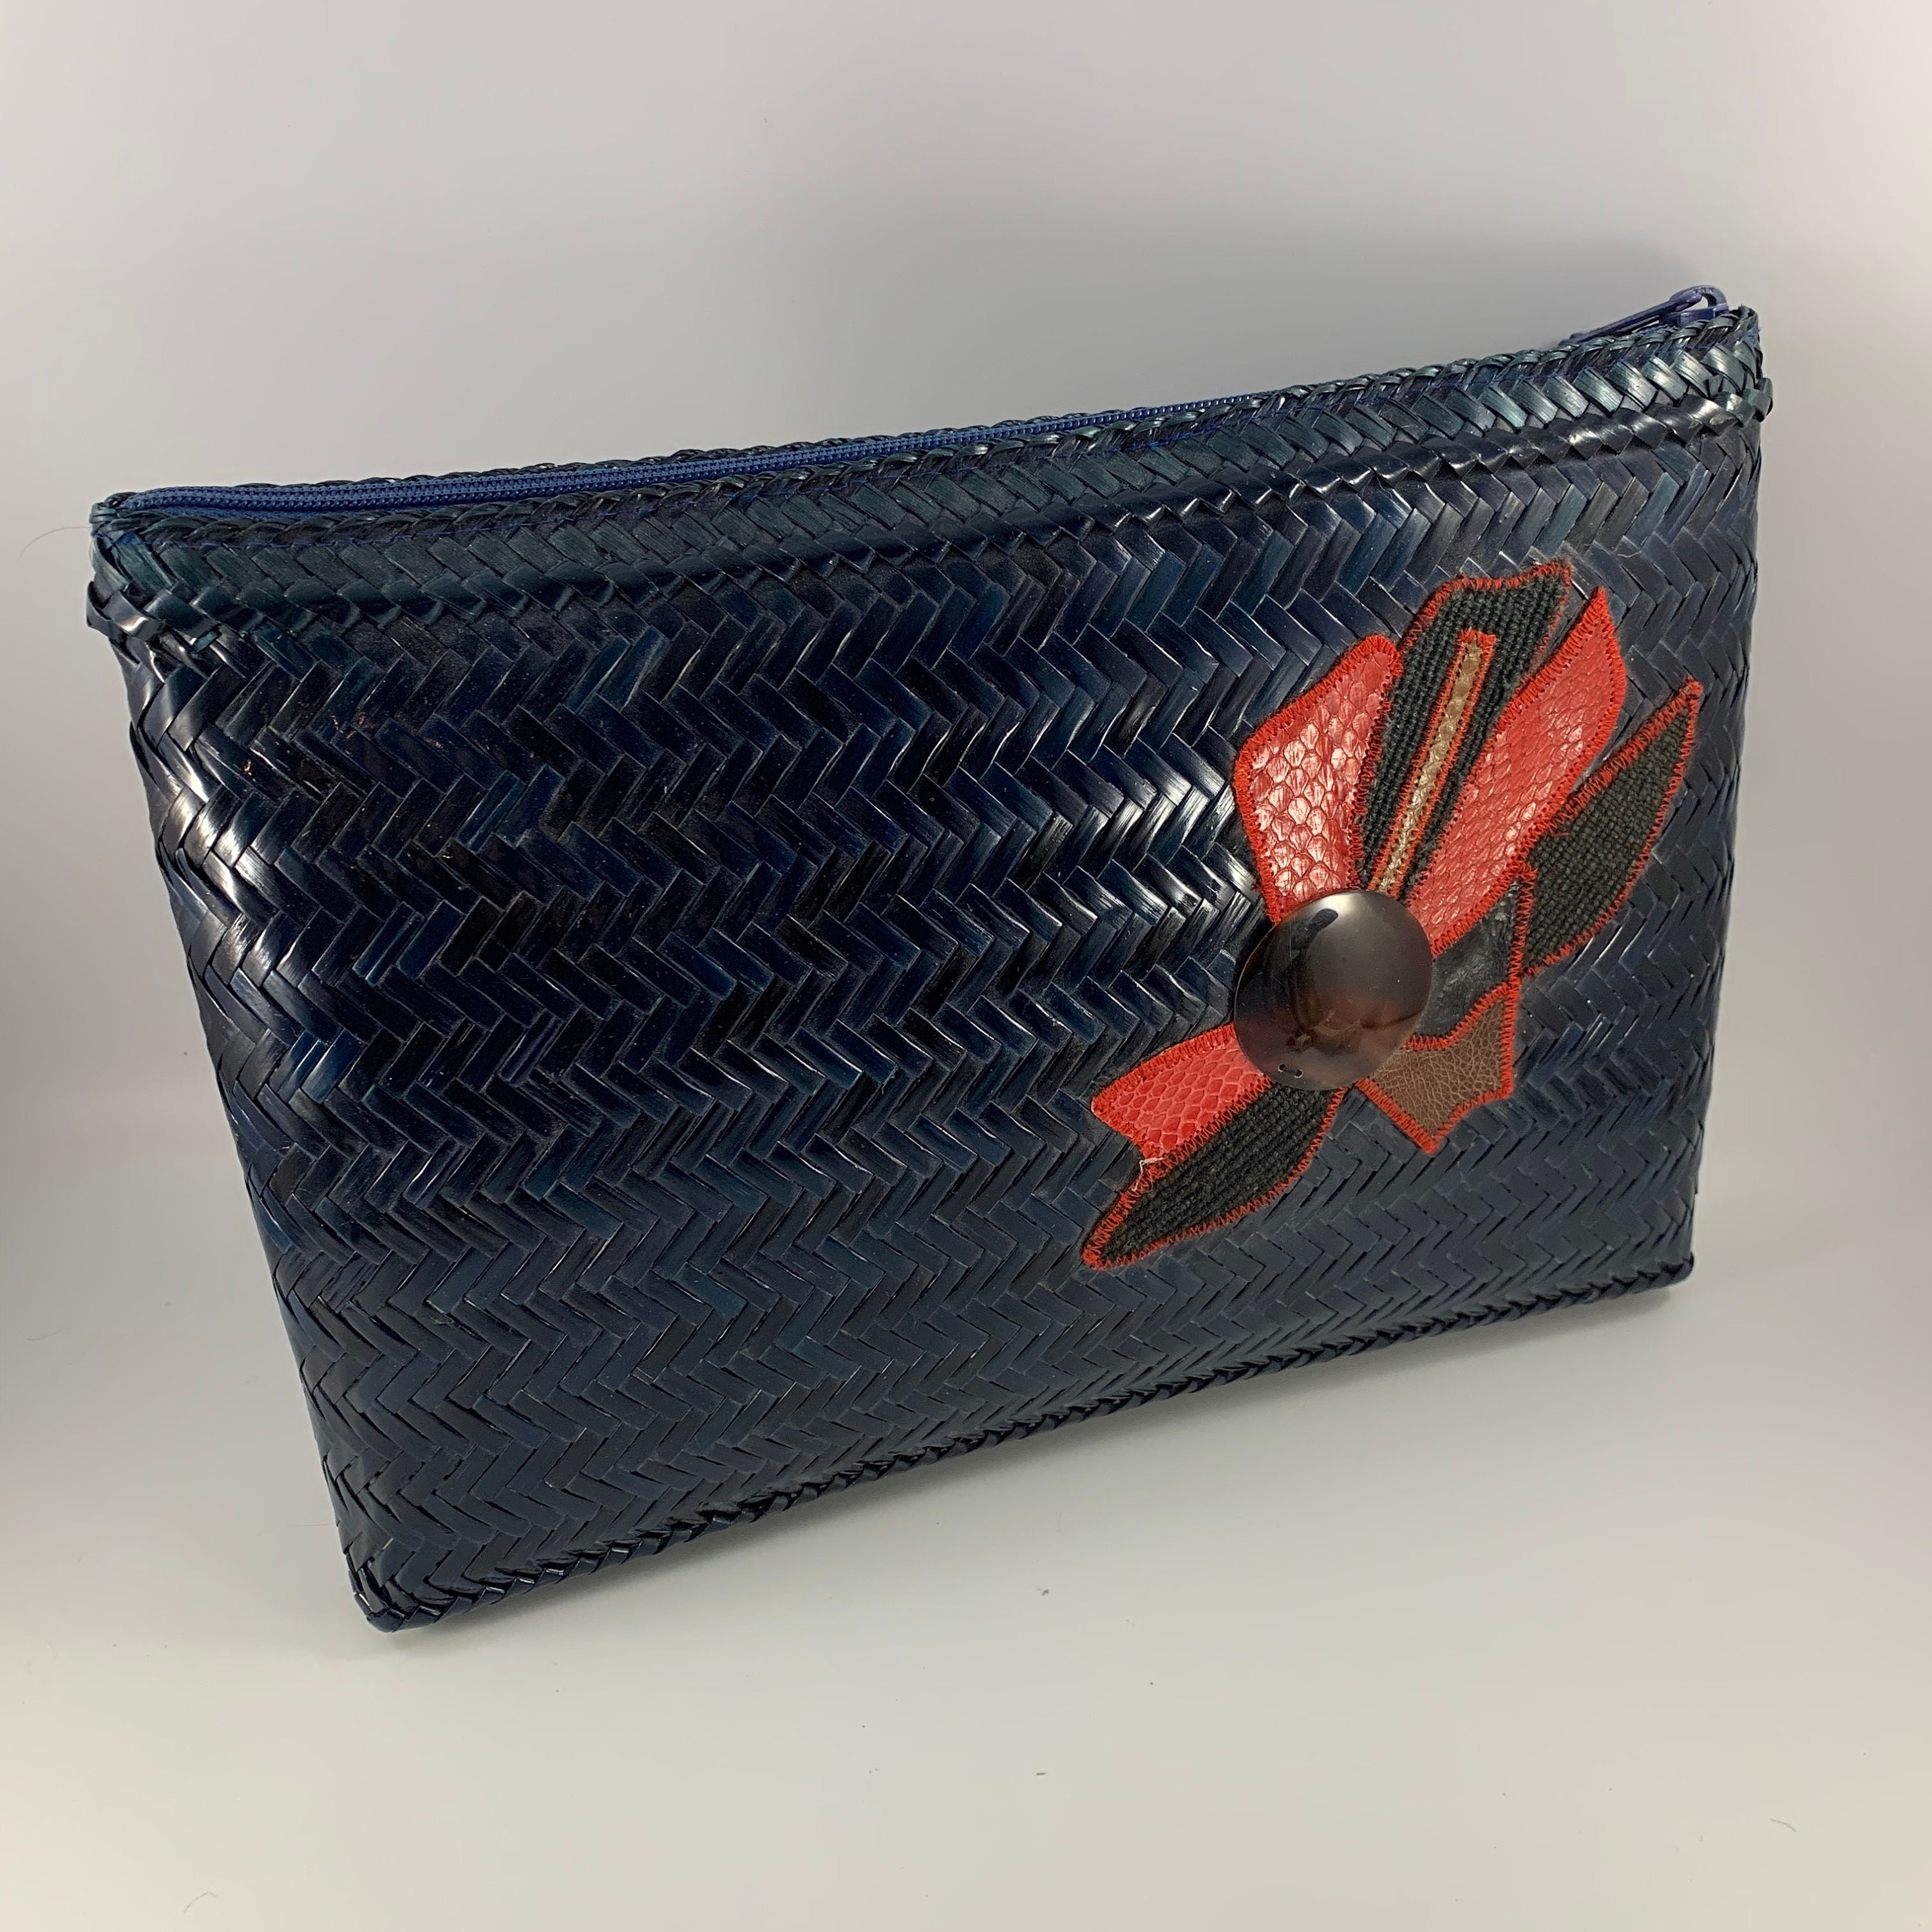 Buy Wholesale Philippines Handmade Clutch With Hand Embroidered Toucan Bird  Design & Handmade Straw Bag at USD 37